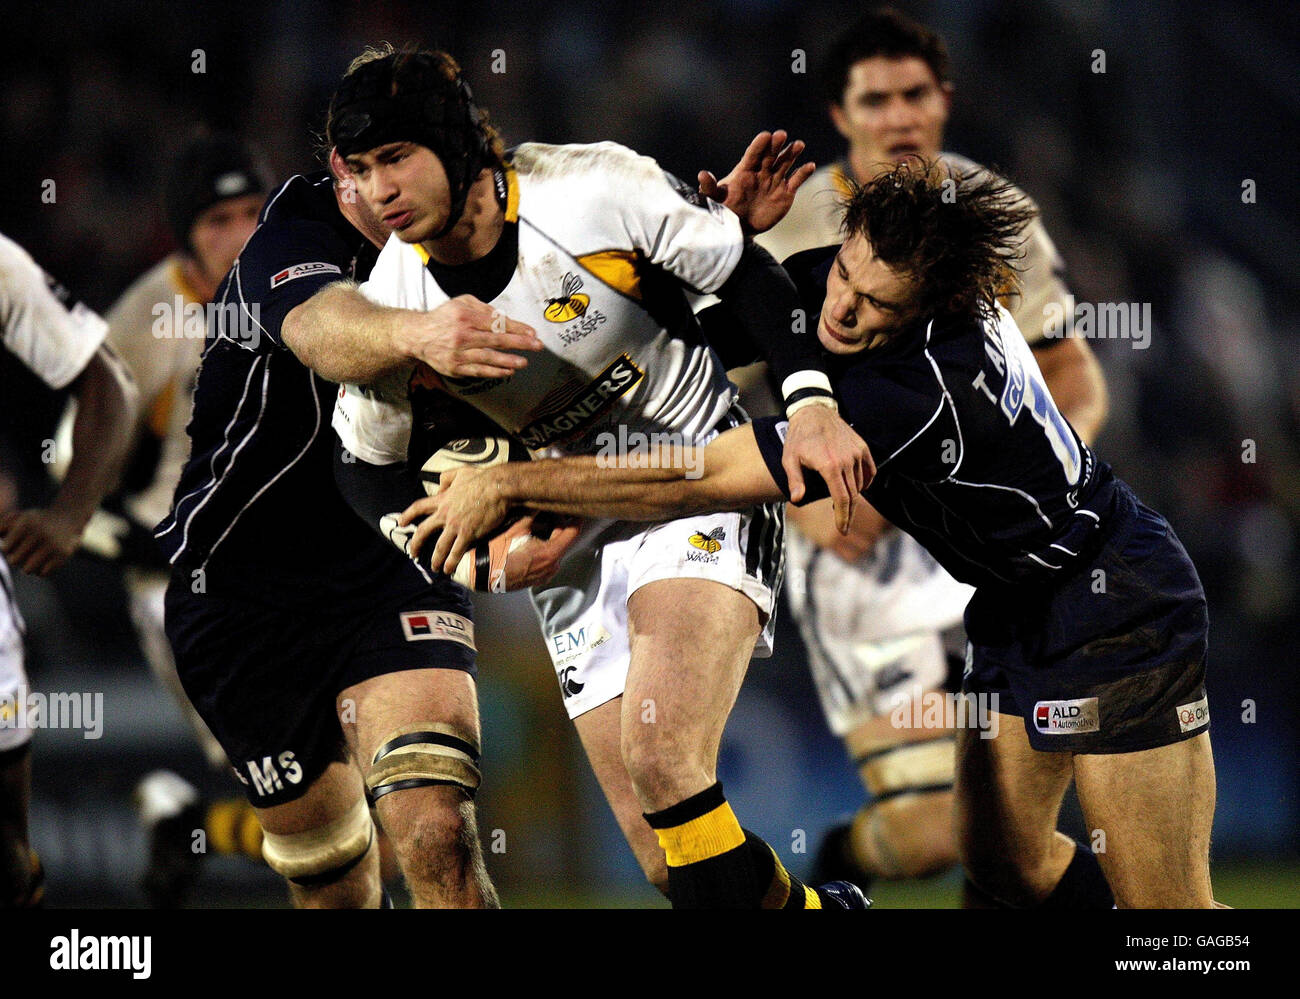 Rugby Union - Guinness Premiership - Bristol v London Wasps - Memorial Stadium. Wasps' Danny Cipriani is tackled by Bristol's Matt Slater and Tom Arscott during the Guinness Premiership match at Memorial Stadium, Bristol. Stock Photo